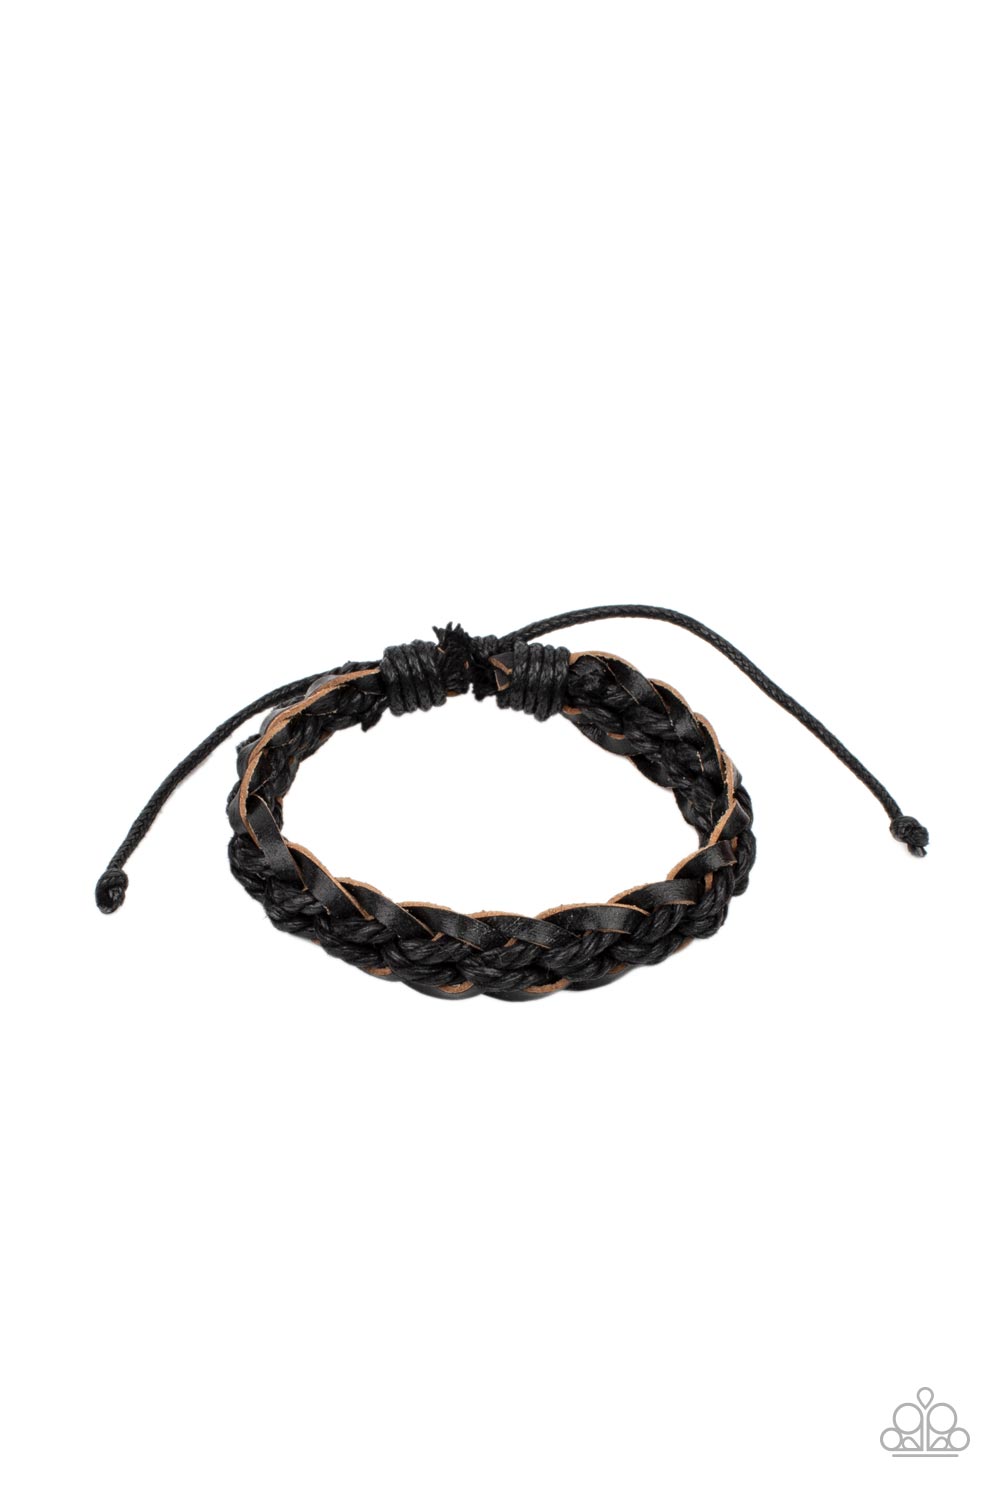 SoCal Scene Black Urban Bracelet - Paparazzi Accessories  Black cording is woven through the center of braided black leather creating a trendy style around the wrist. Features an adjustable sliding knot closure.  All Paparazzi Accessories are lead free and nickel free!  Sold as one individual bracelet.